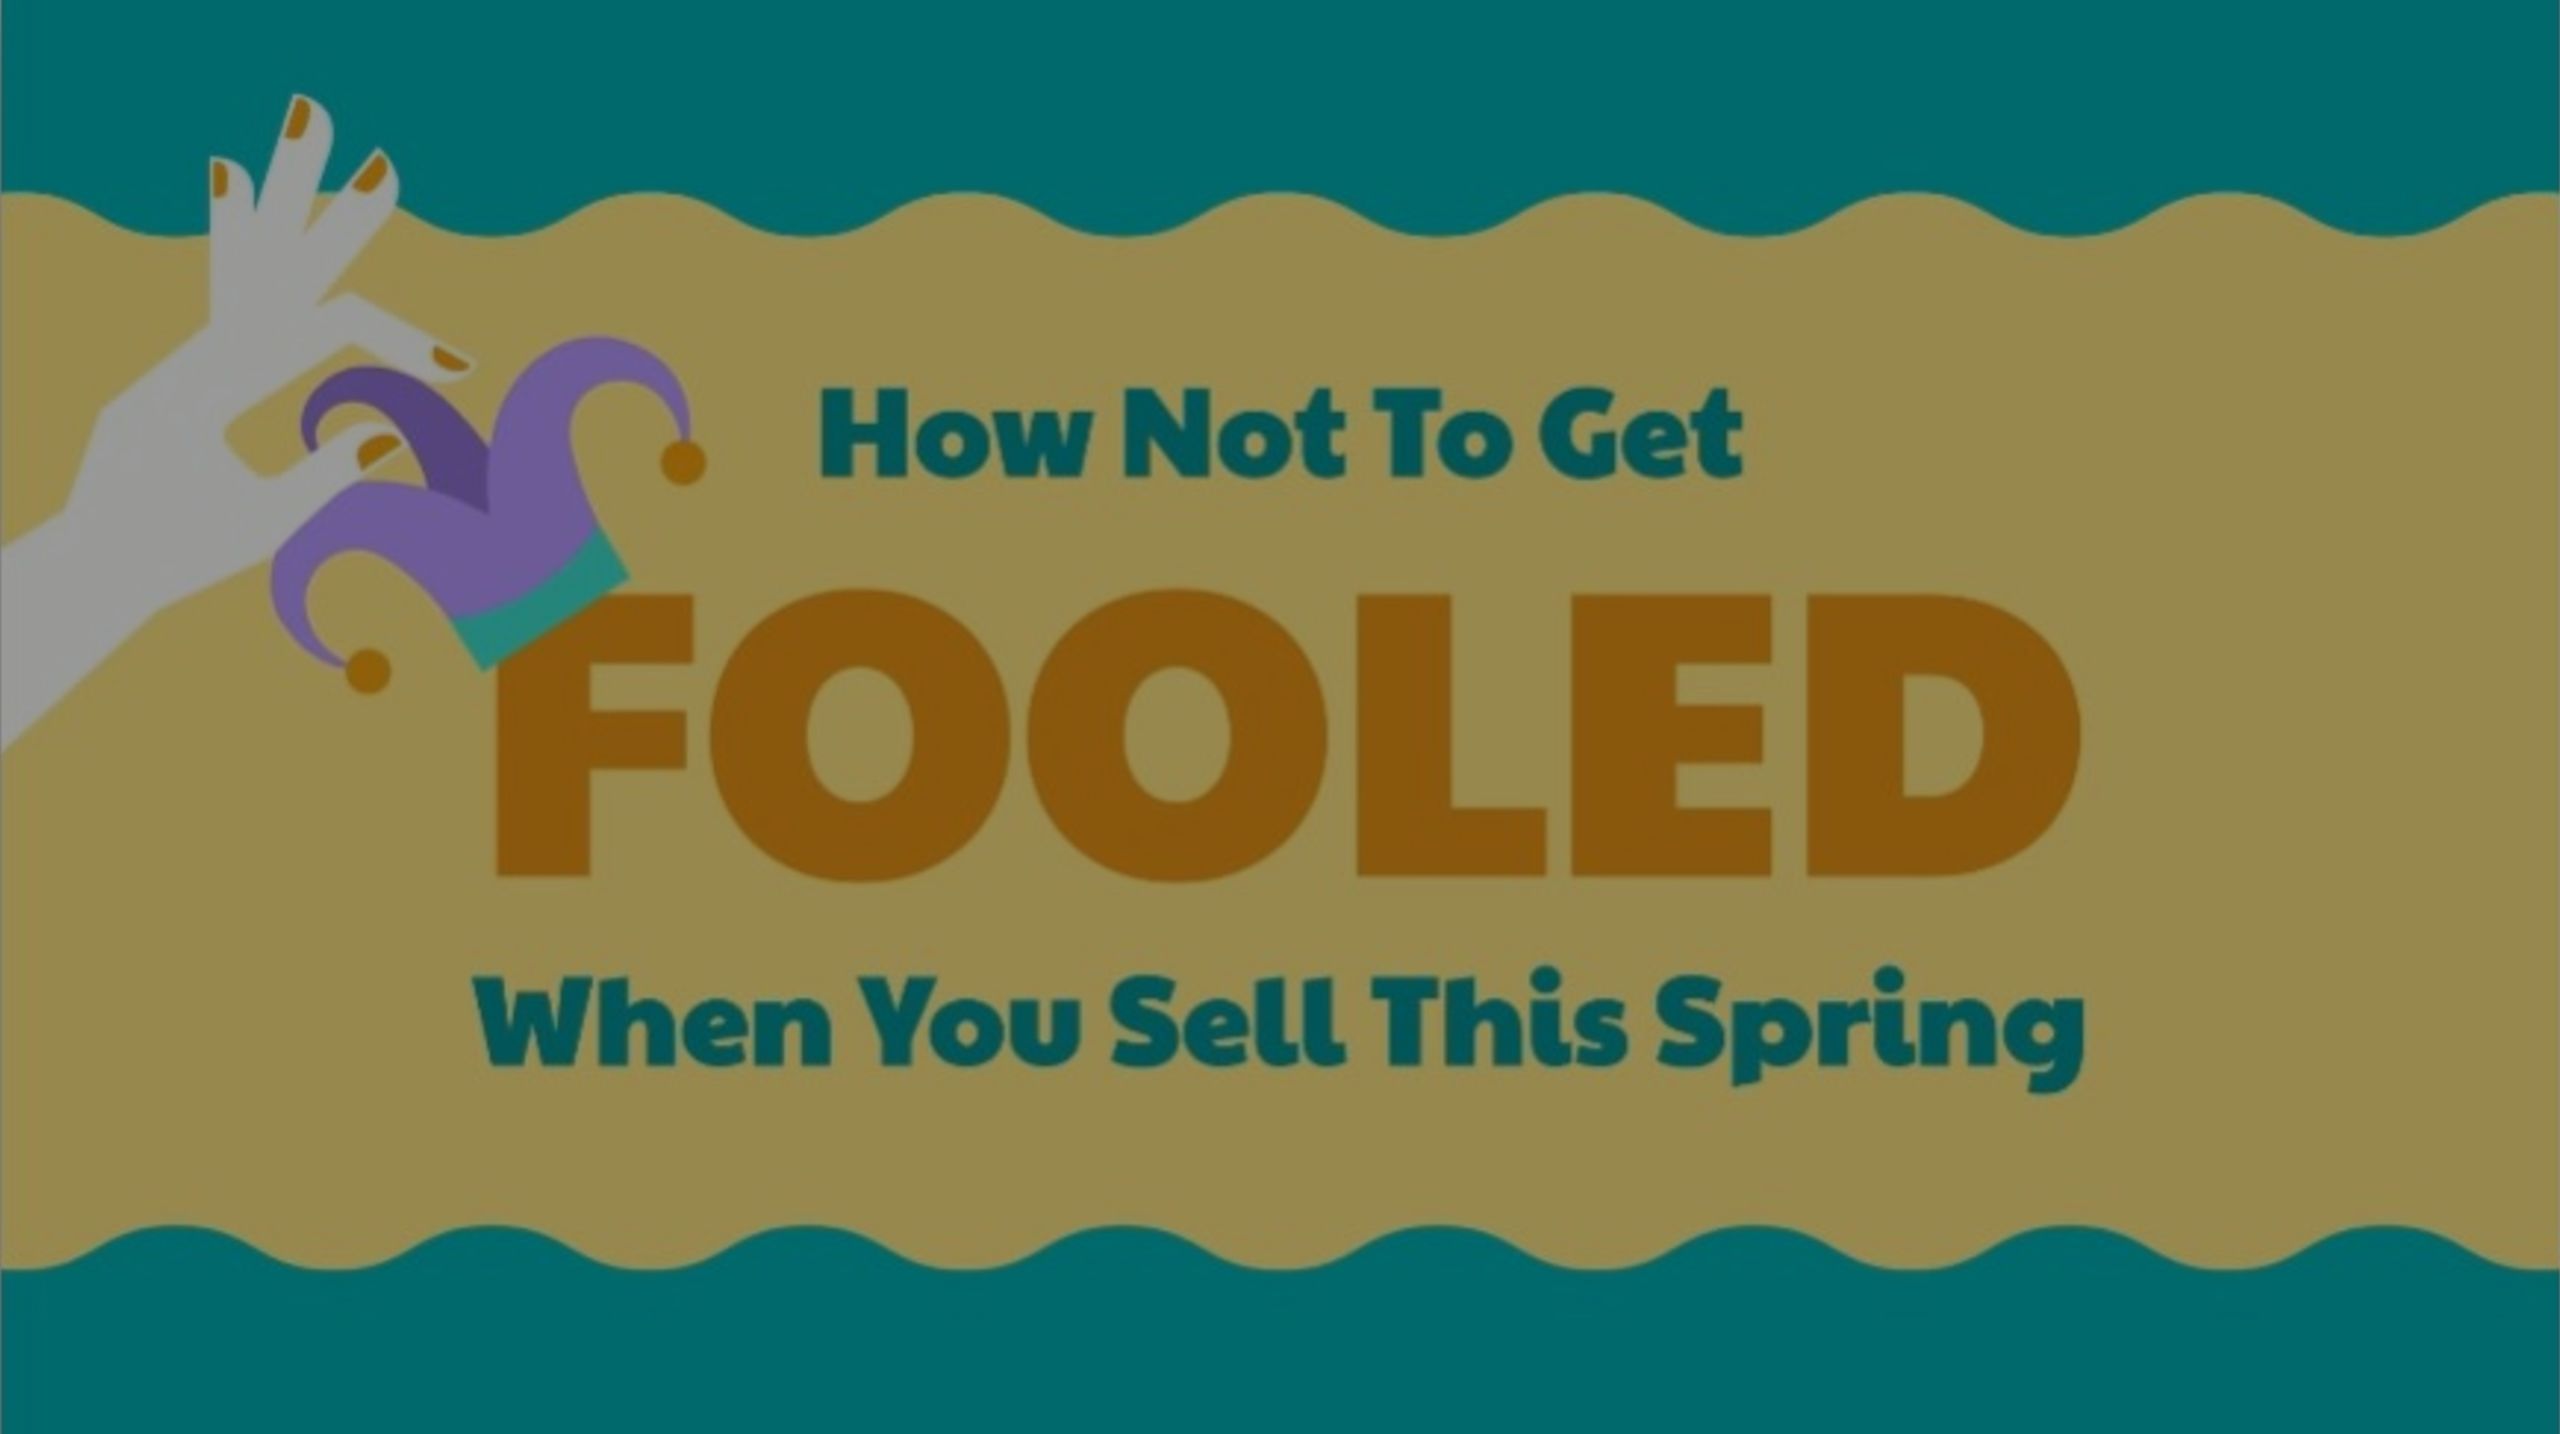 How Not To Get Fooled When You Sell This Spring